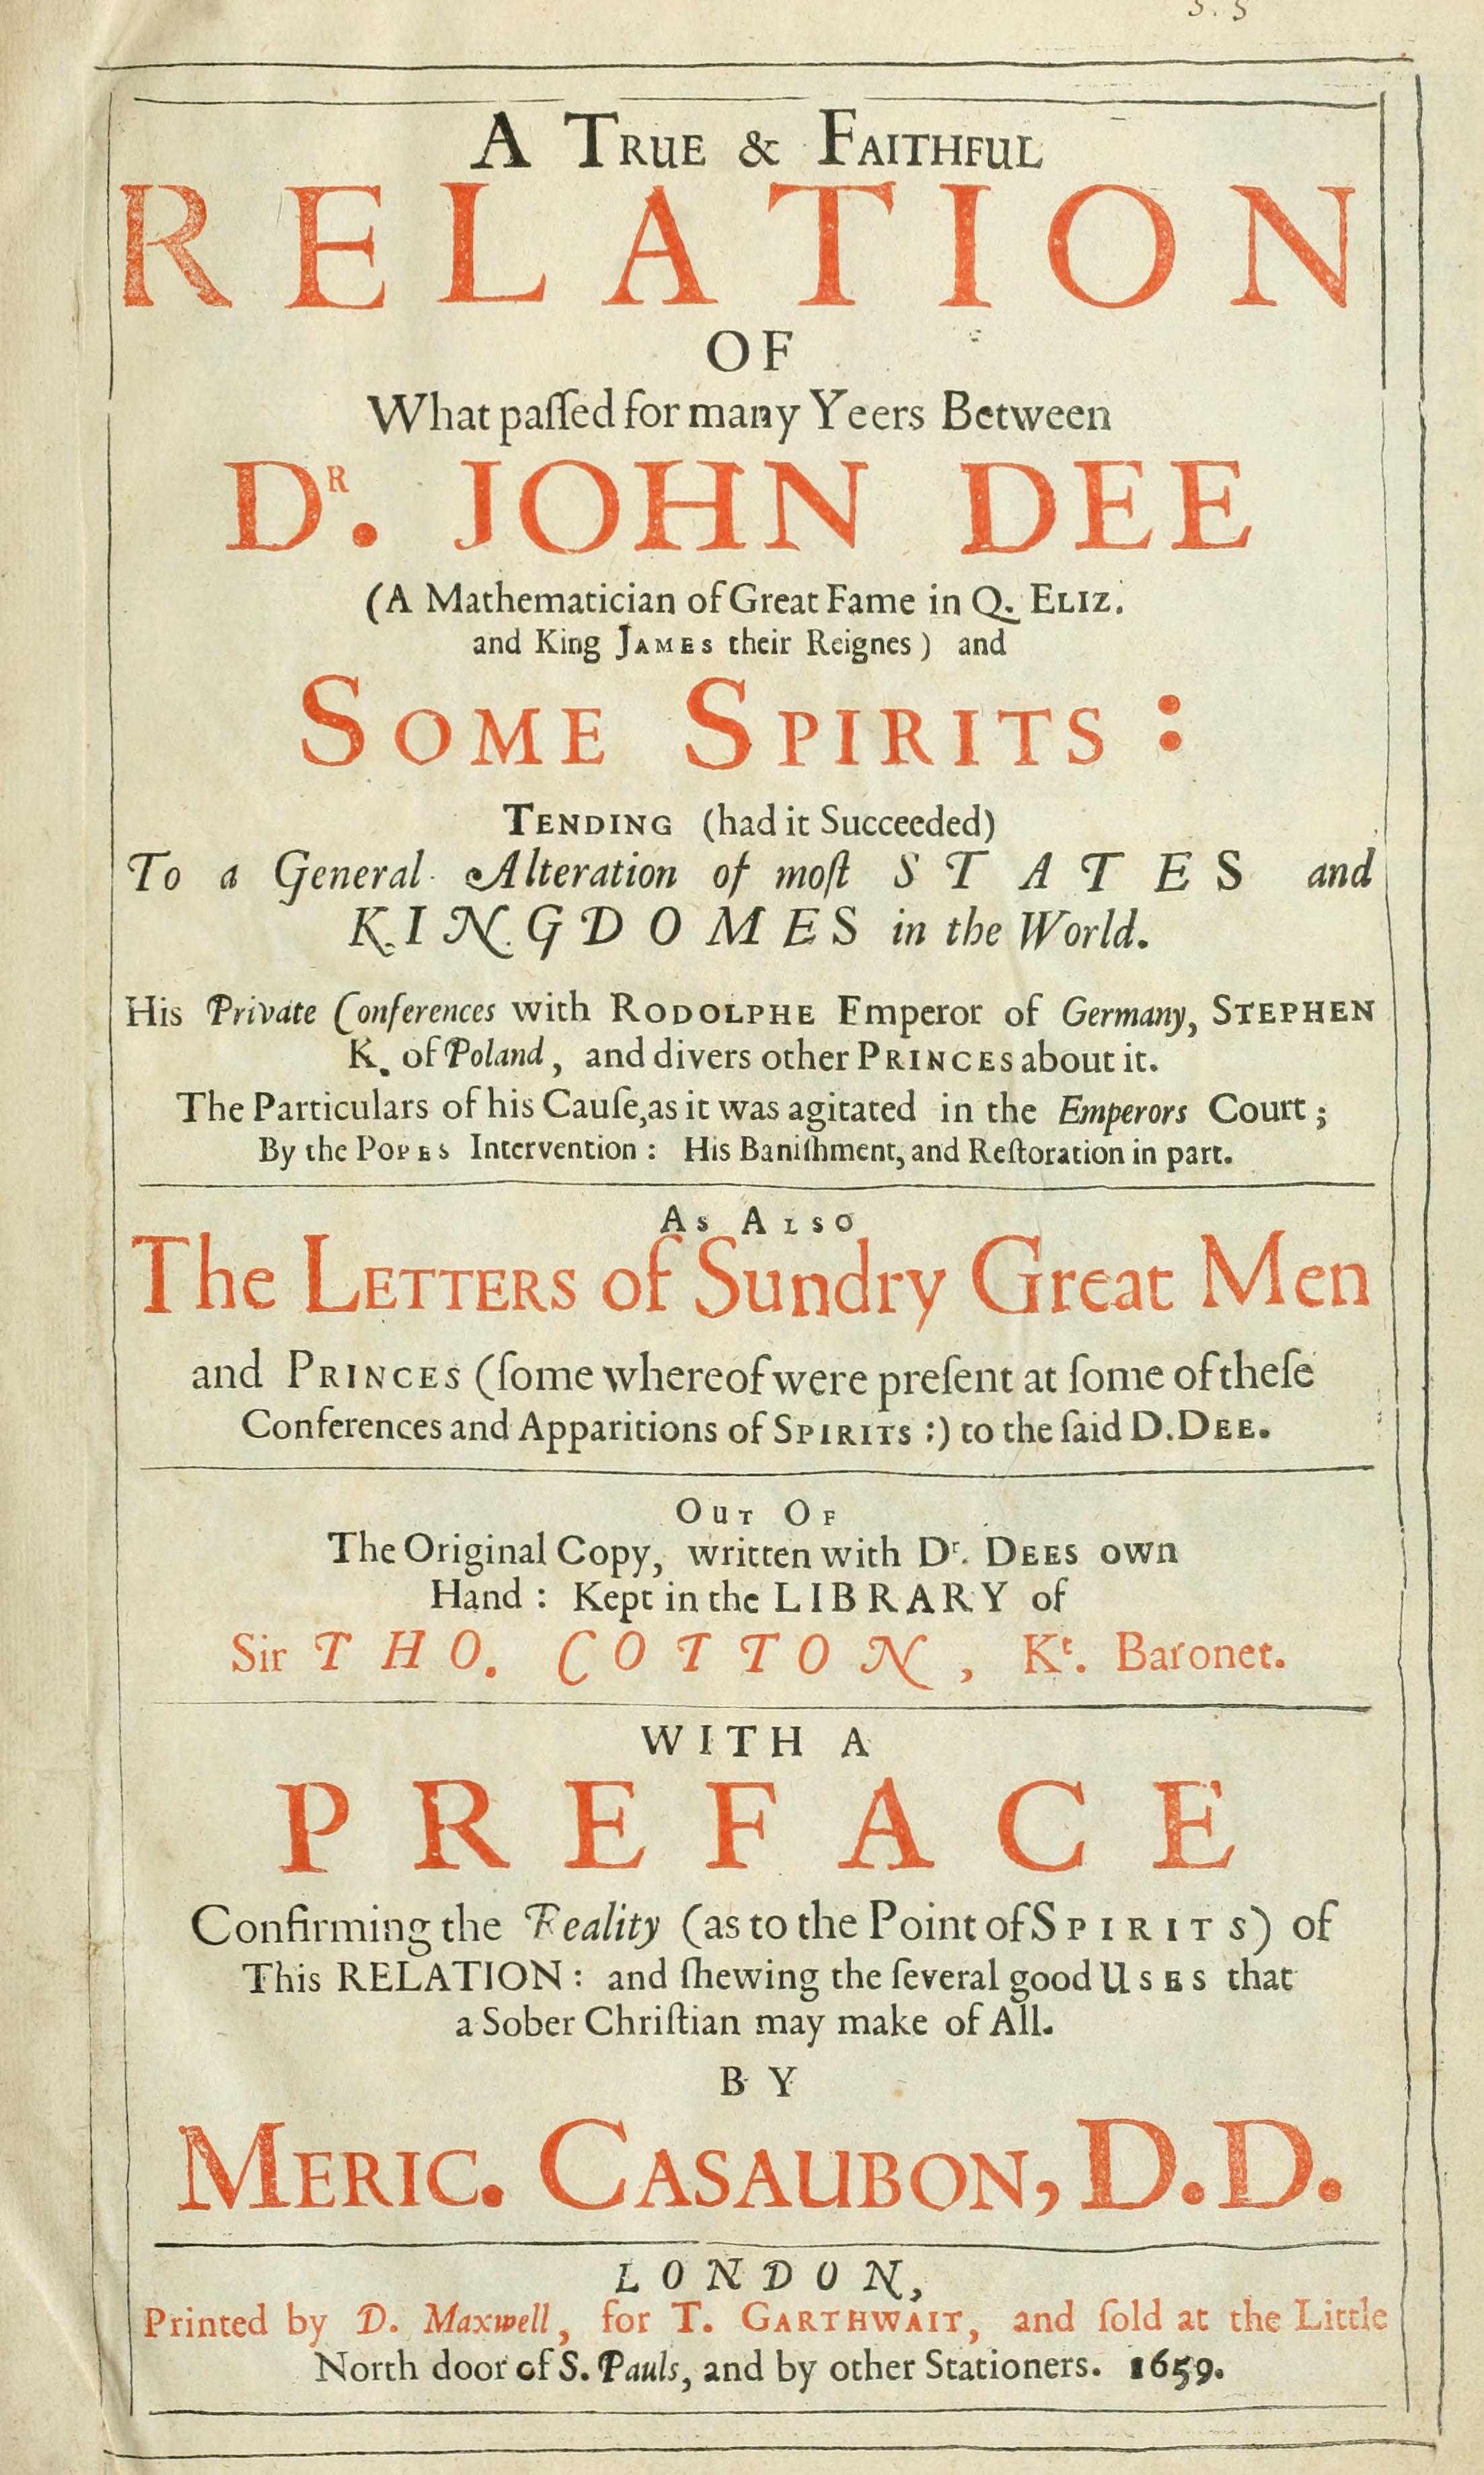 A TRUE AND FAITHFUL RELATION of What Passed for many Years Between Dr. John Dee (A Mathematician of Great Fame in Q. Eliz. and King James, Their Reigns) and SOME SPIRITS Tending (had it Succeeded) To a General Alteration of most STATES and KING-DOMS in the World. His Private Conferences with Rodolphe Emperor of Germany, Stephen K. of Poland, and divers other PRINCES about it. The Particulars of his Cause, as it was agitated in the Emperor's Court; by the Pope's Intervention; His Banishment, and Restoration in part As Also The Letters of Sundry Great Men / and Princes (some whereof were present at some of the Conferences and Apparitions of Spirits) to the said Dr. Dee Out of The Original Copy, written with Dr/Dee's own Hand: Kept in the Library of / Sir THO. COTTON, K's Baronet With a PREFACE Confirming the fealtity (as to the Point/of Spirits) of This Relation: and shewing the several good Uses that a sober Christian may make of All by Meric. Casaubon, D.D. / London / Printed by D.Maxwell, for T. Garthwait, / and sold at the Little / North door of S.Paul's, and by / other Stationers. 1659.